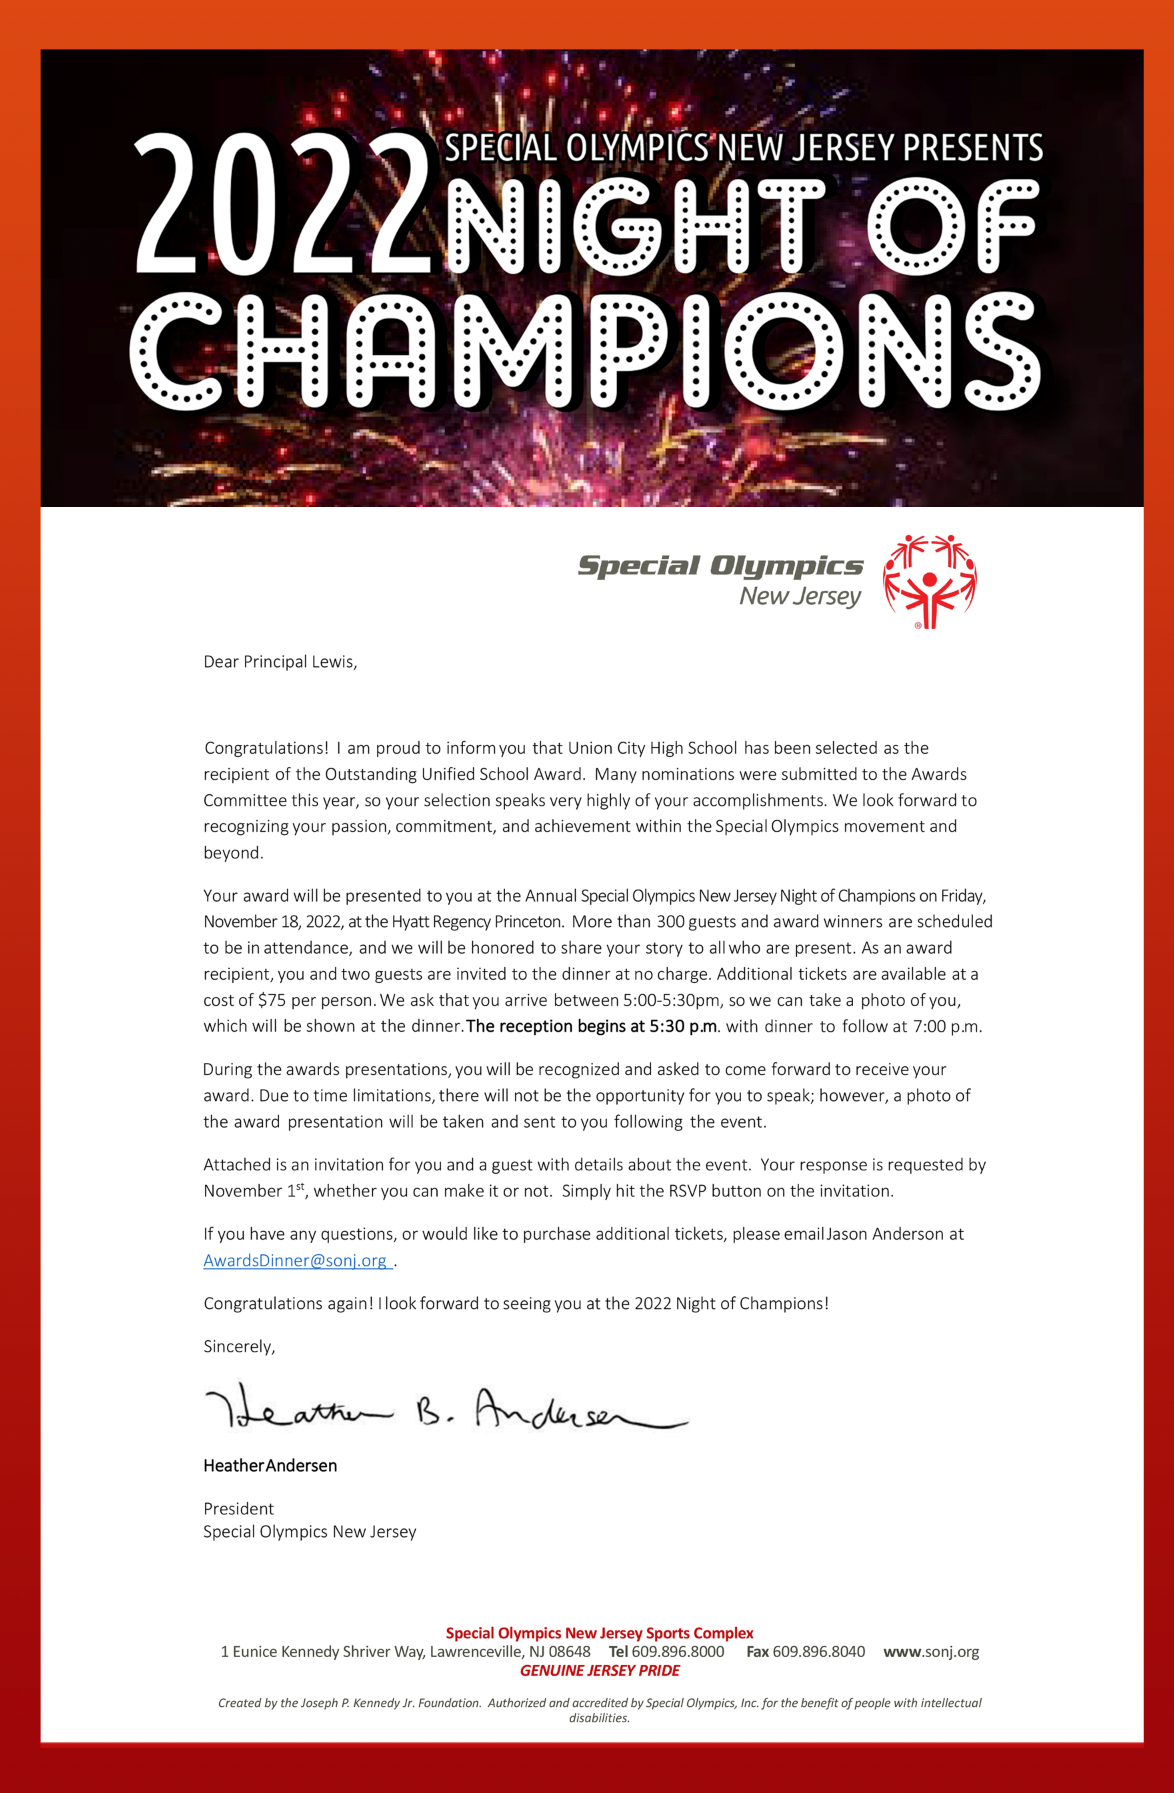 Letter of Congratulations to Principal Ryan Lewis from the Special Olympics New Jersey